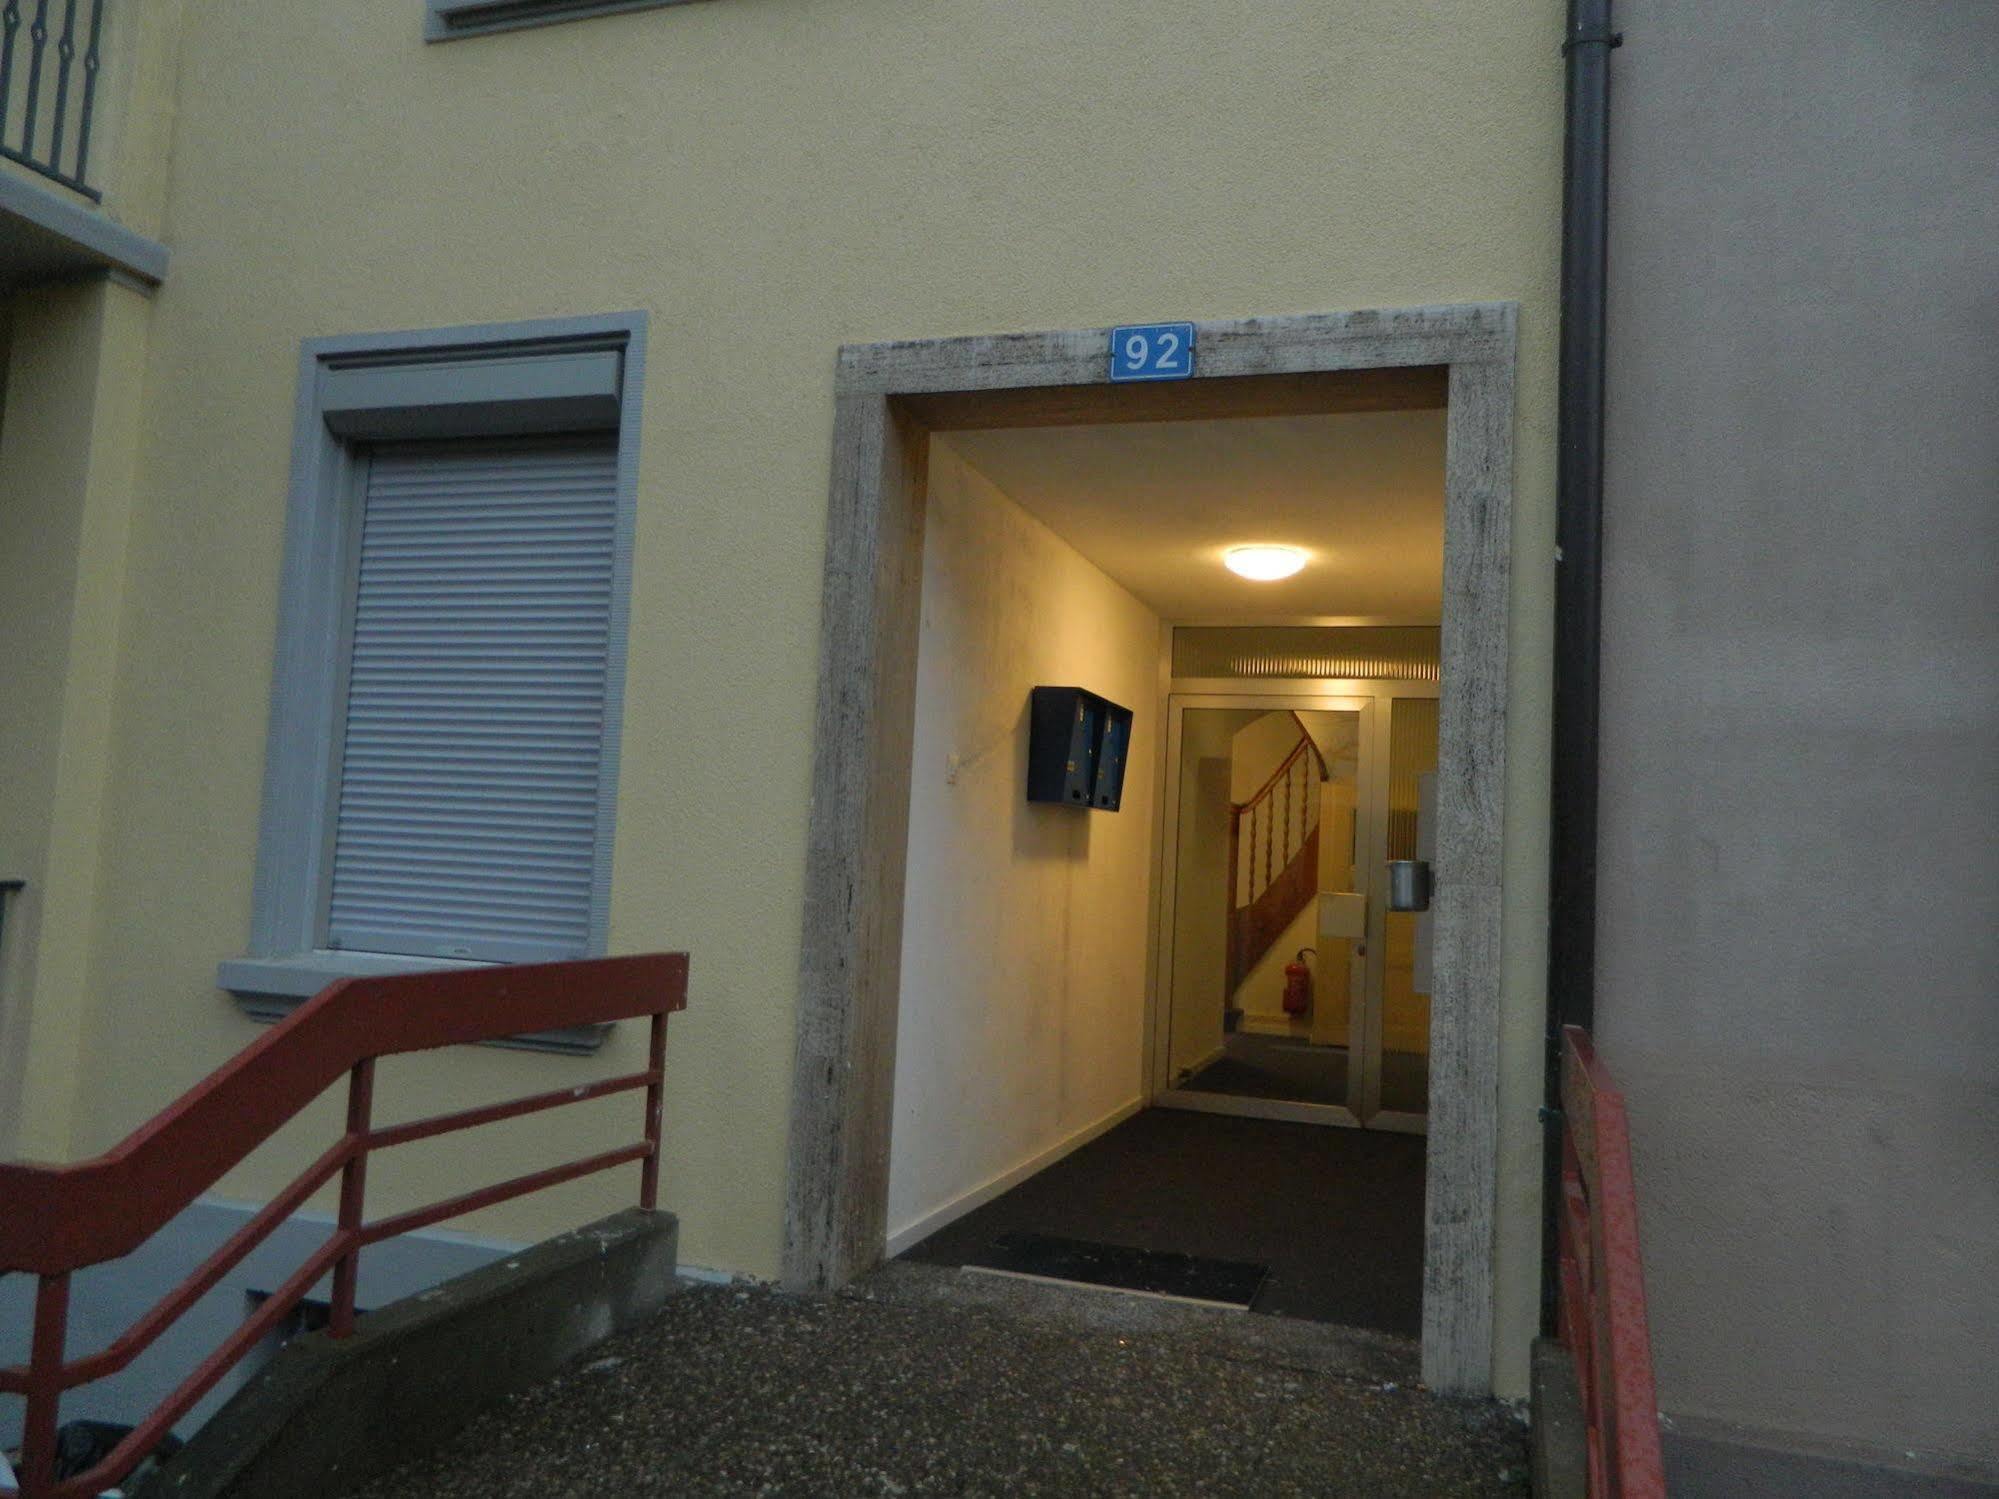 Rent A Home Delsbergerallee - Self Check-In Basilea Exterior foto